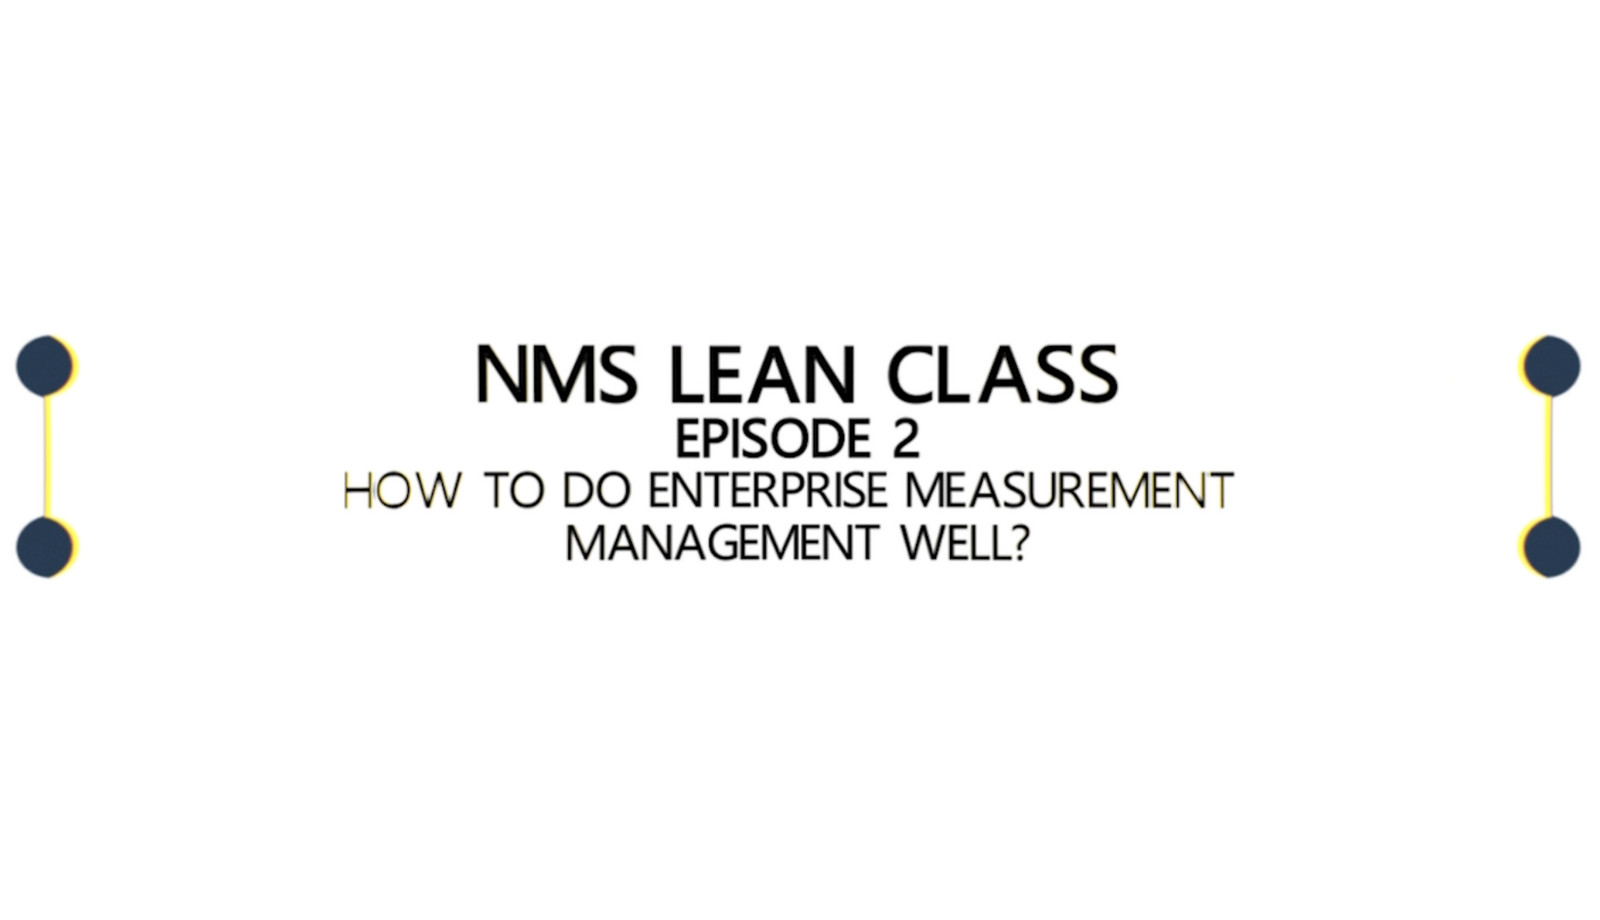 NMS Learn Class Episode 2 - How to do enterprise measurement management well?